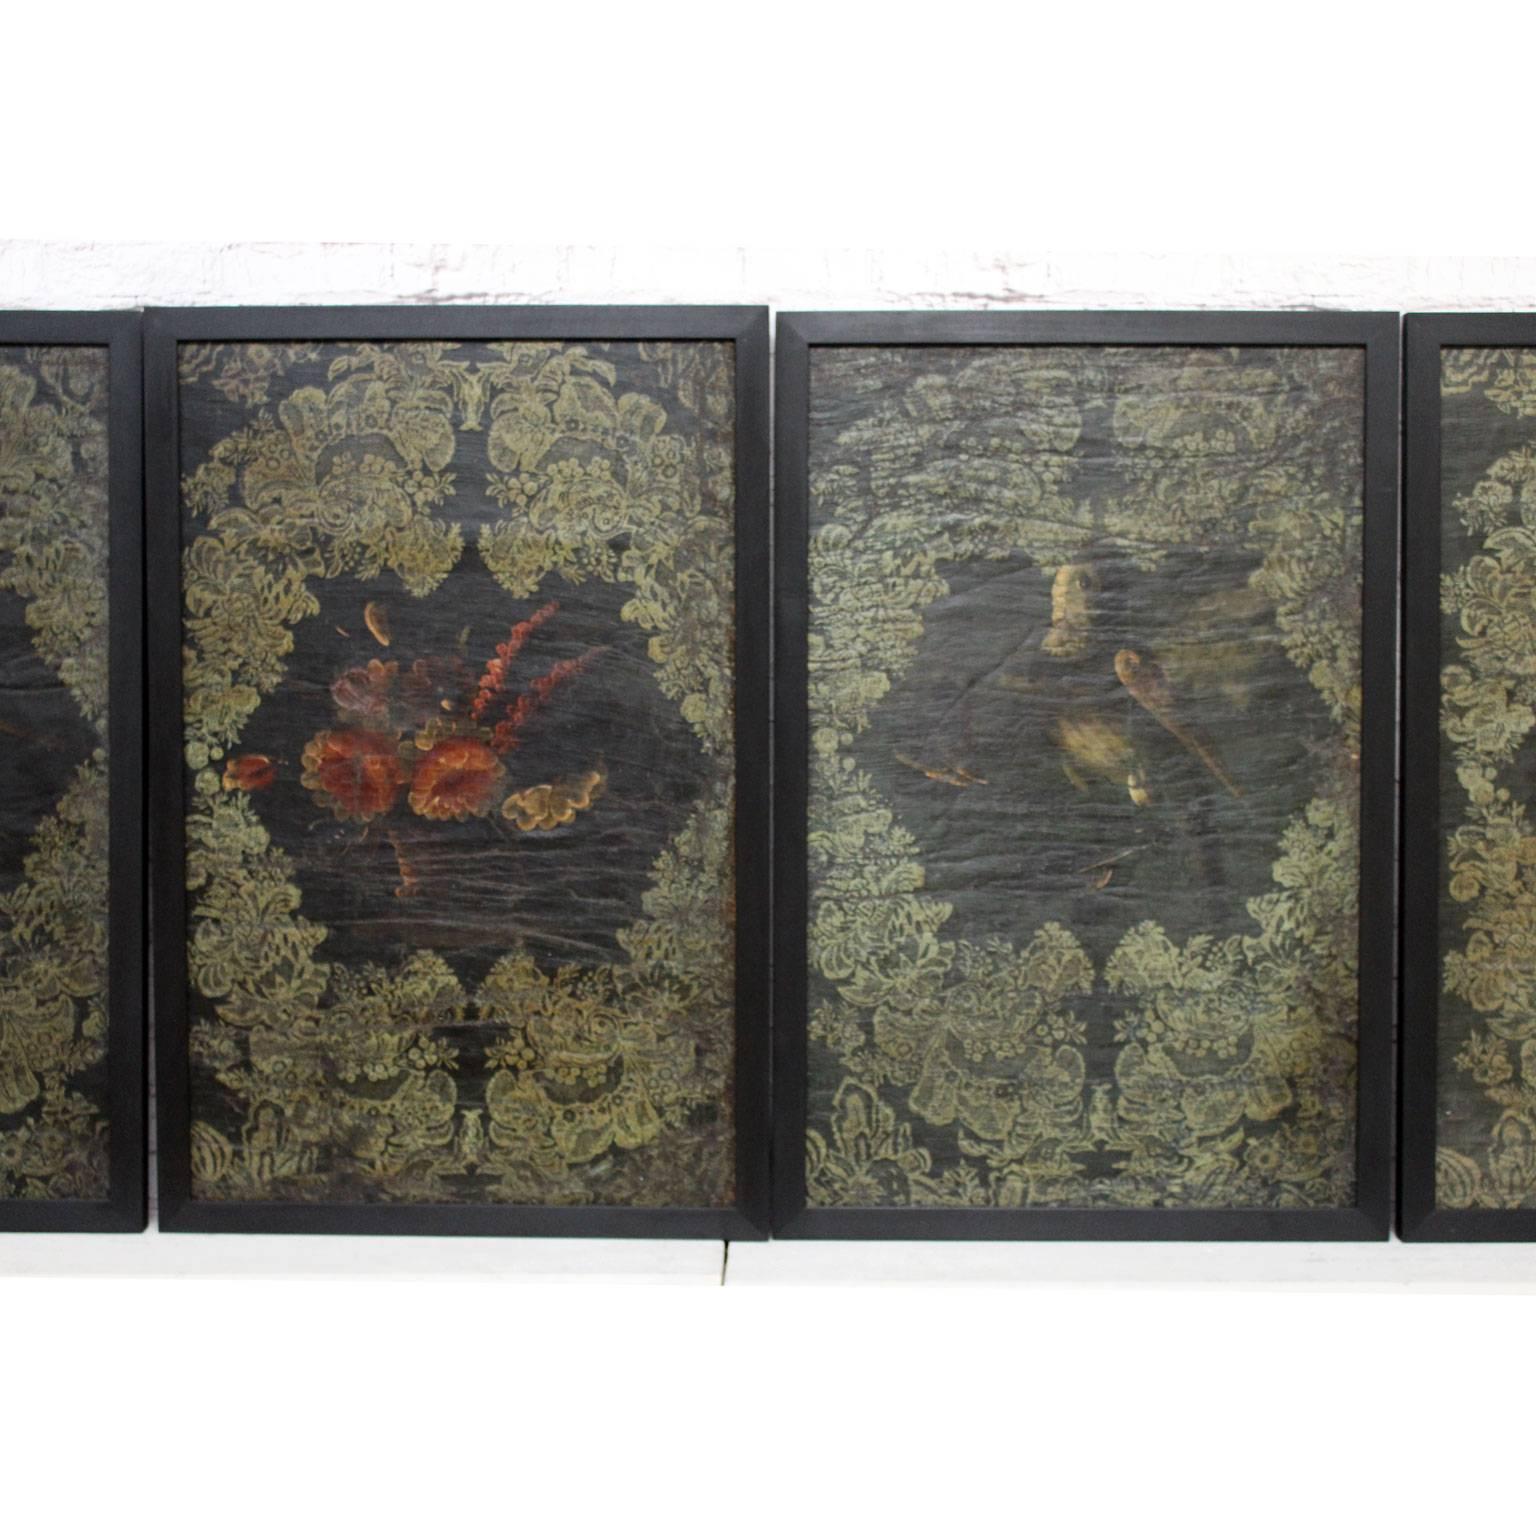 Other Set of Four 17th Century, Spanish Oil on Hessian Wall Covering Paintings